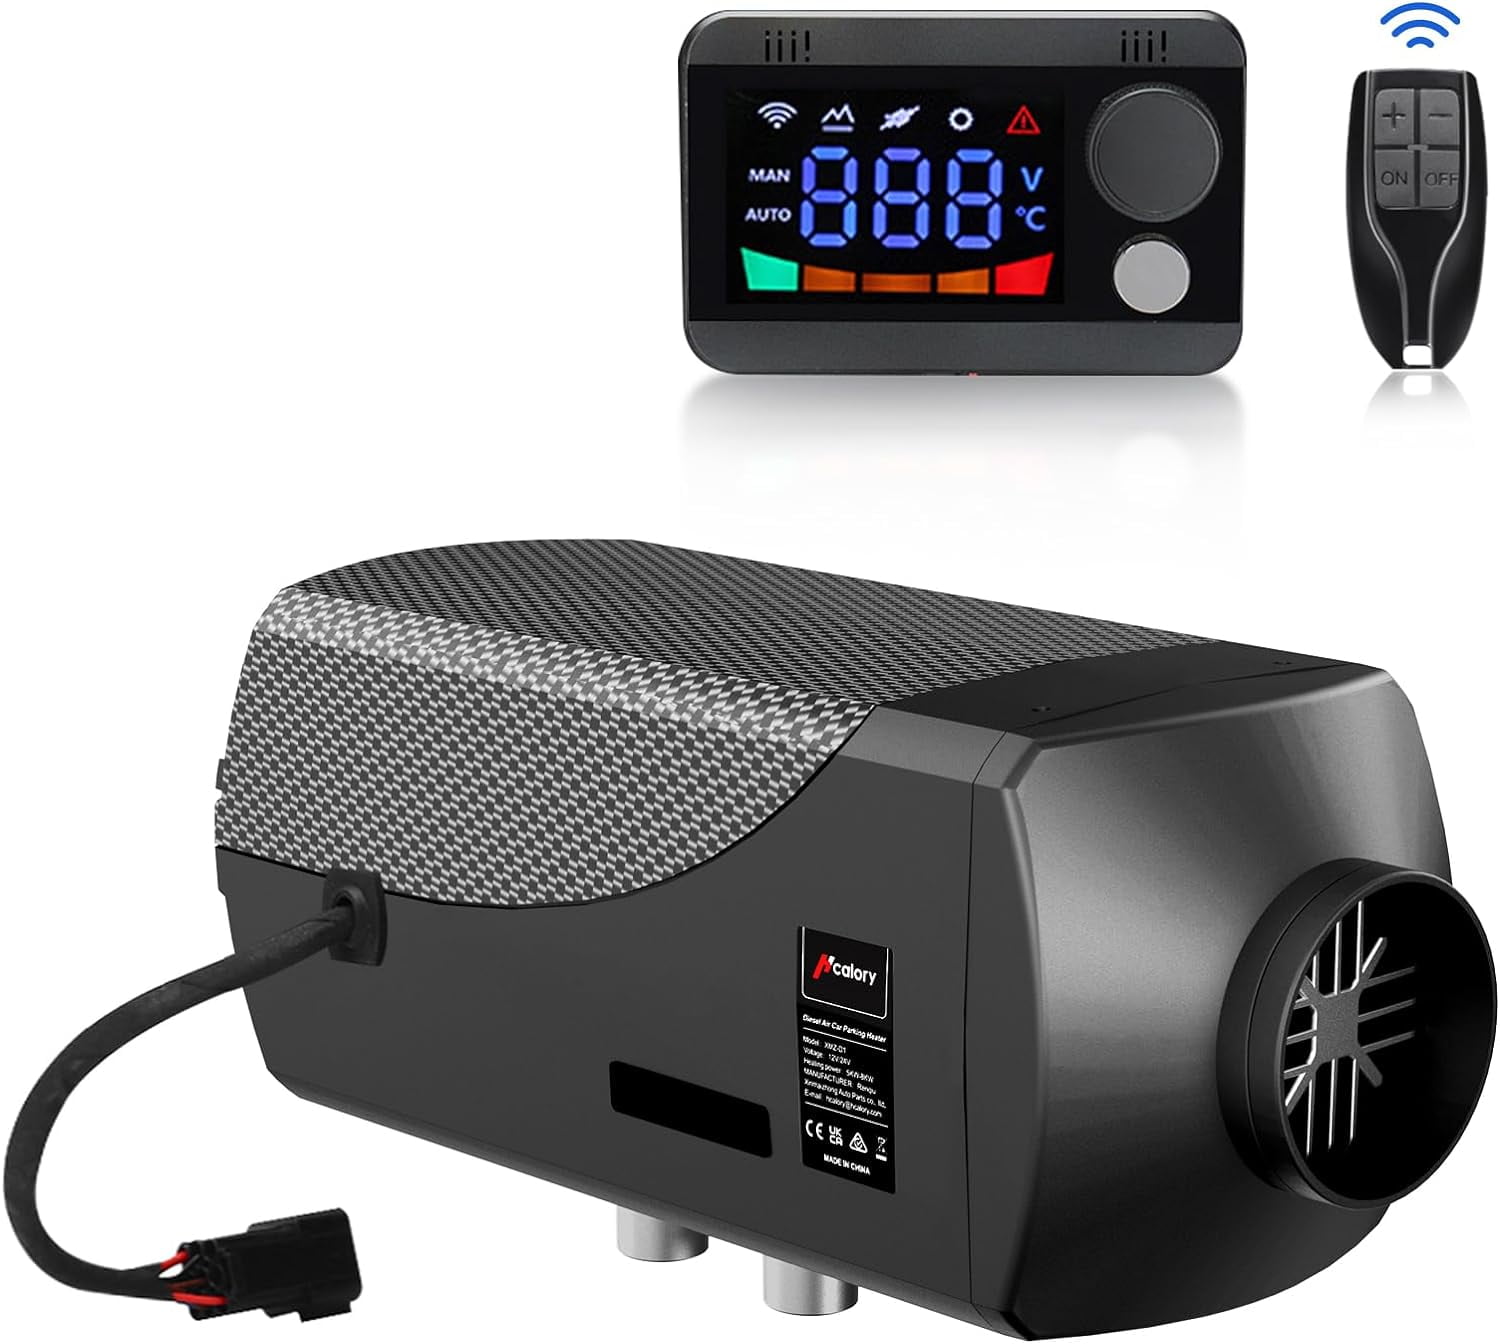 Hcalory 12V/24V/220V 5-8KW Portable All In One Car Air Parking Diesel  Heater LCD